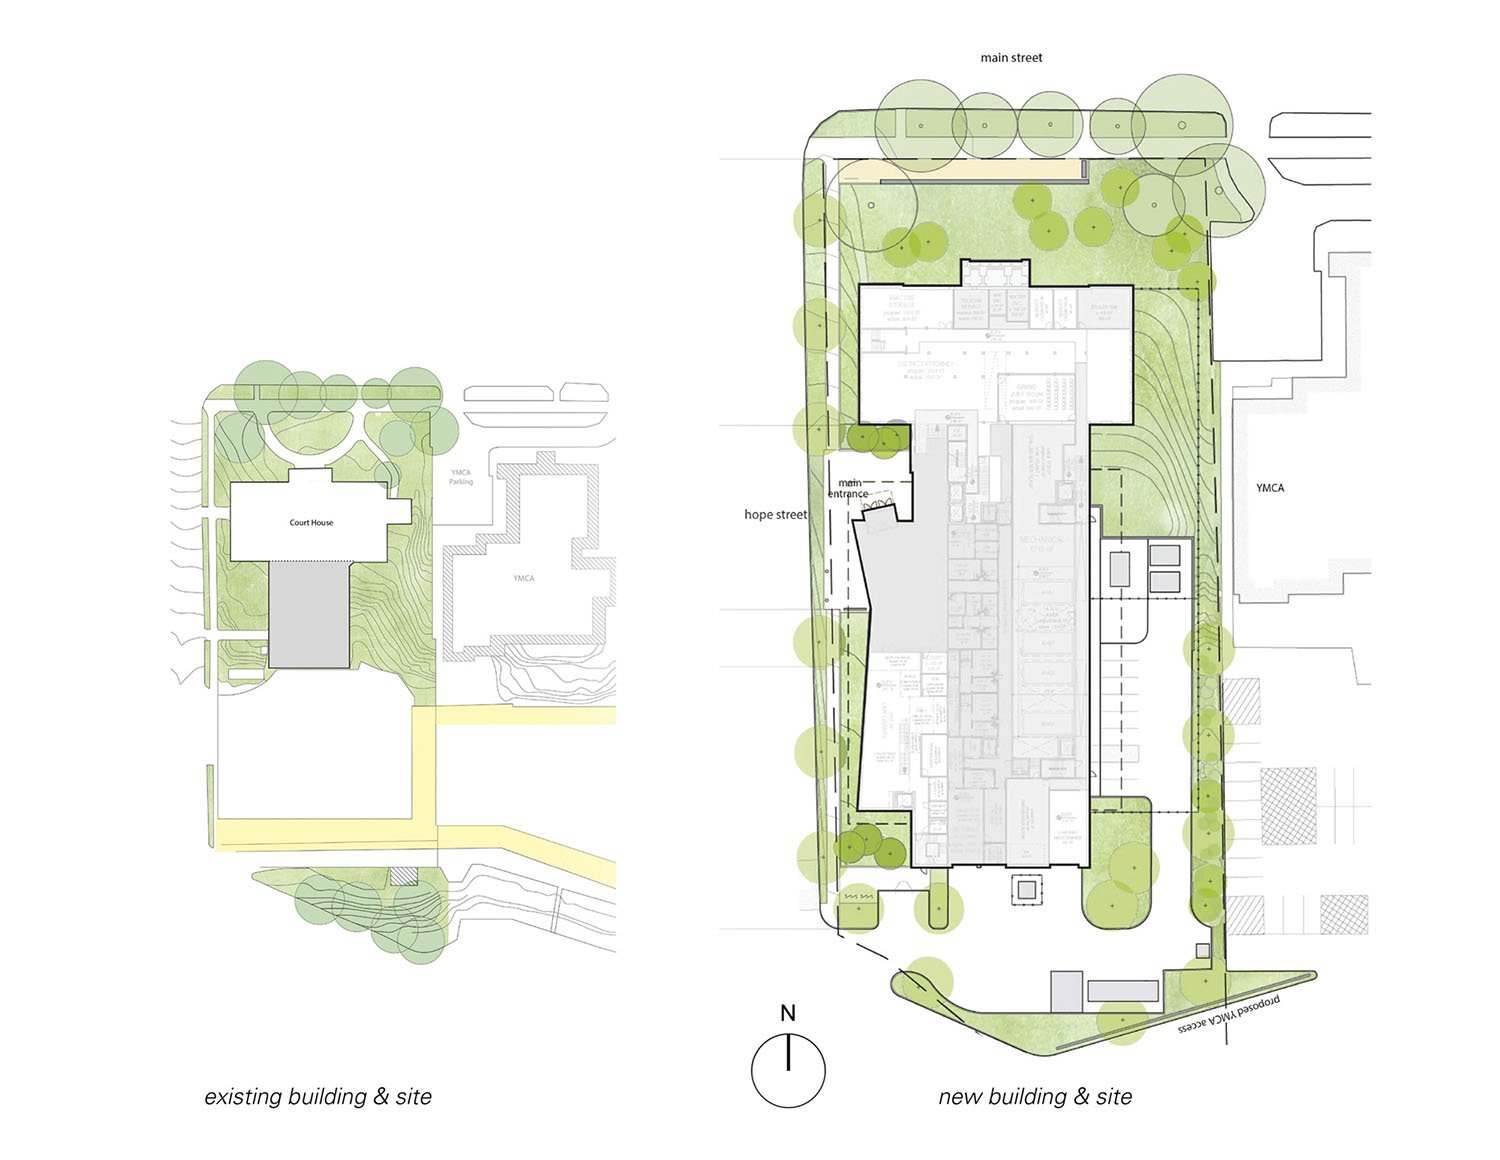 Existing Building and Site & New Building and Site with Accessible Entrance | Leers Weinzapfel Associates